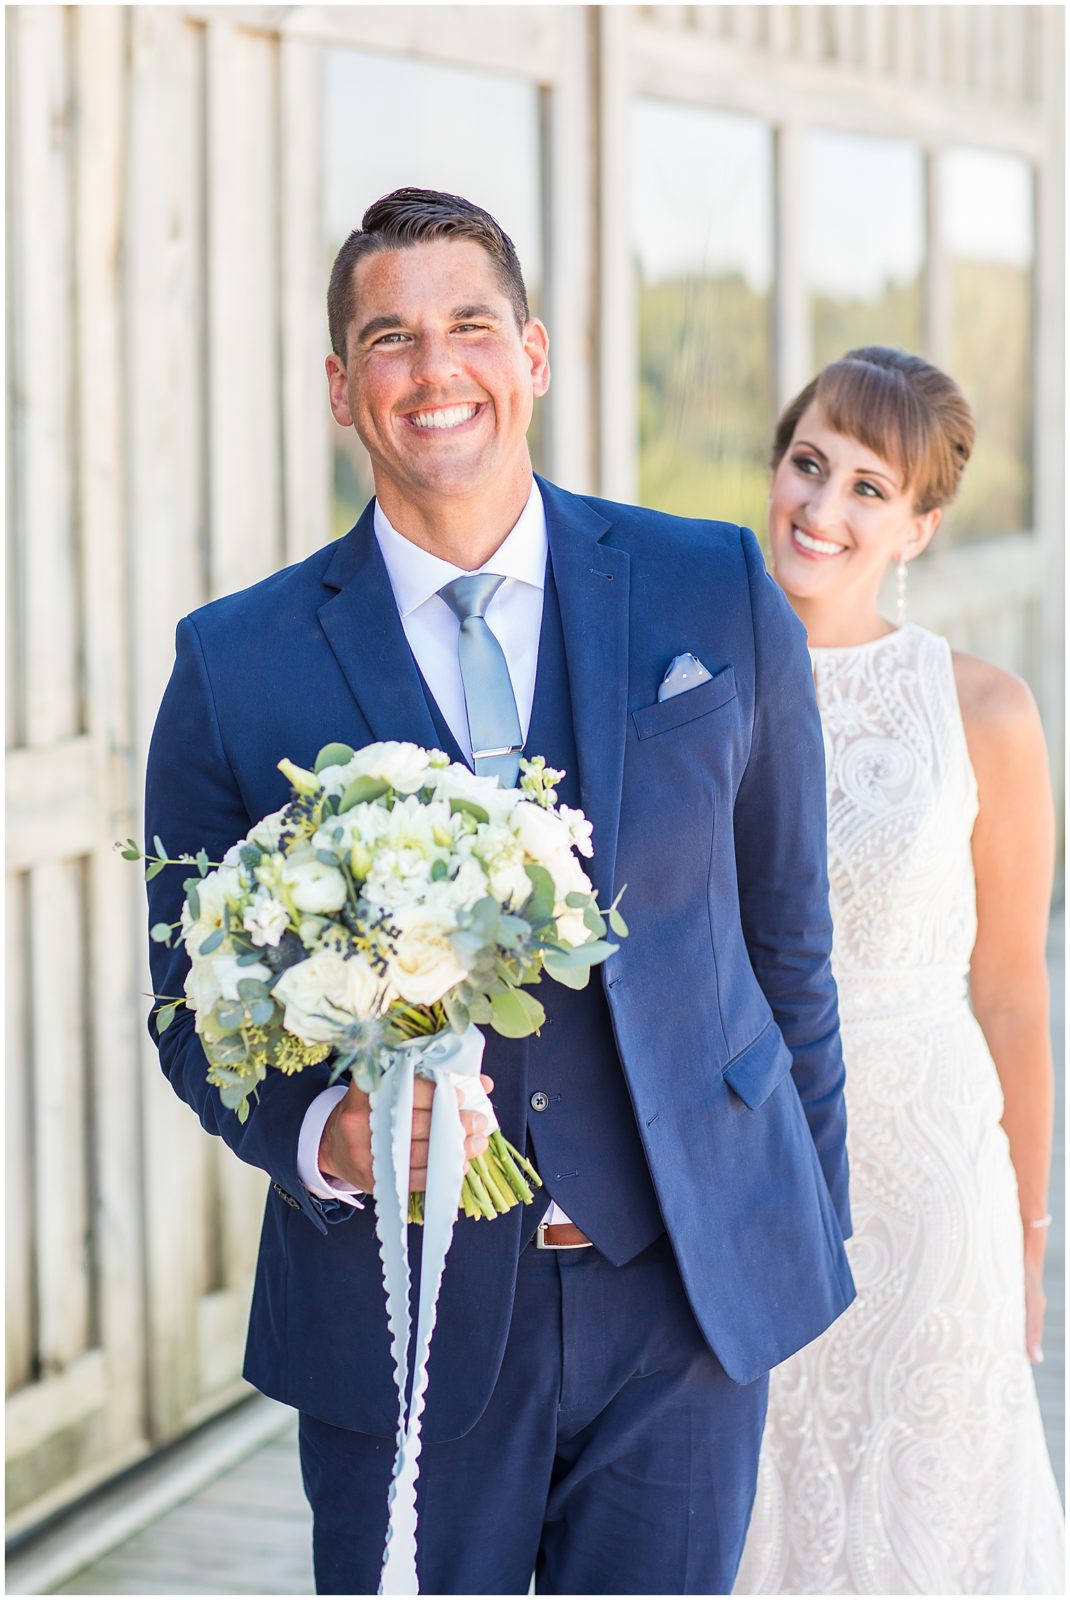 Bride and Groom Portraits | Tucker Hill Wedding in Hinton, Iowa shot by Jessica Brees Photo & Video